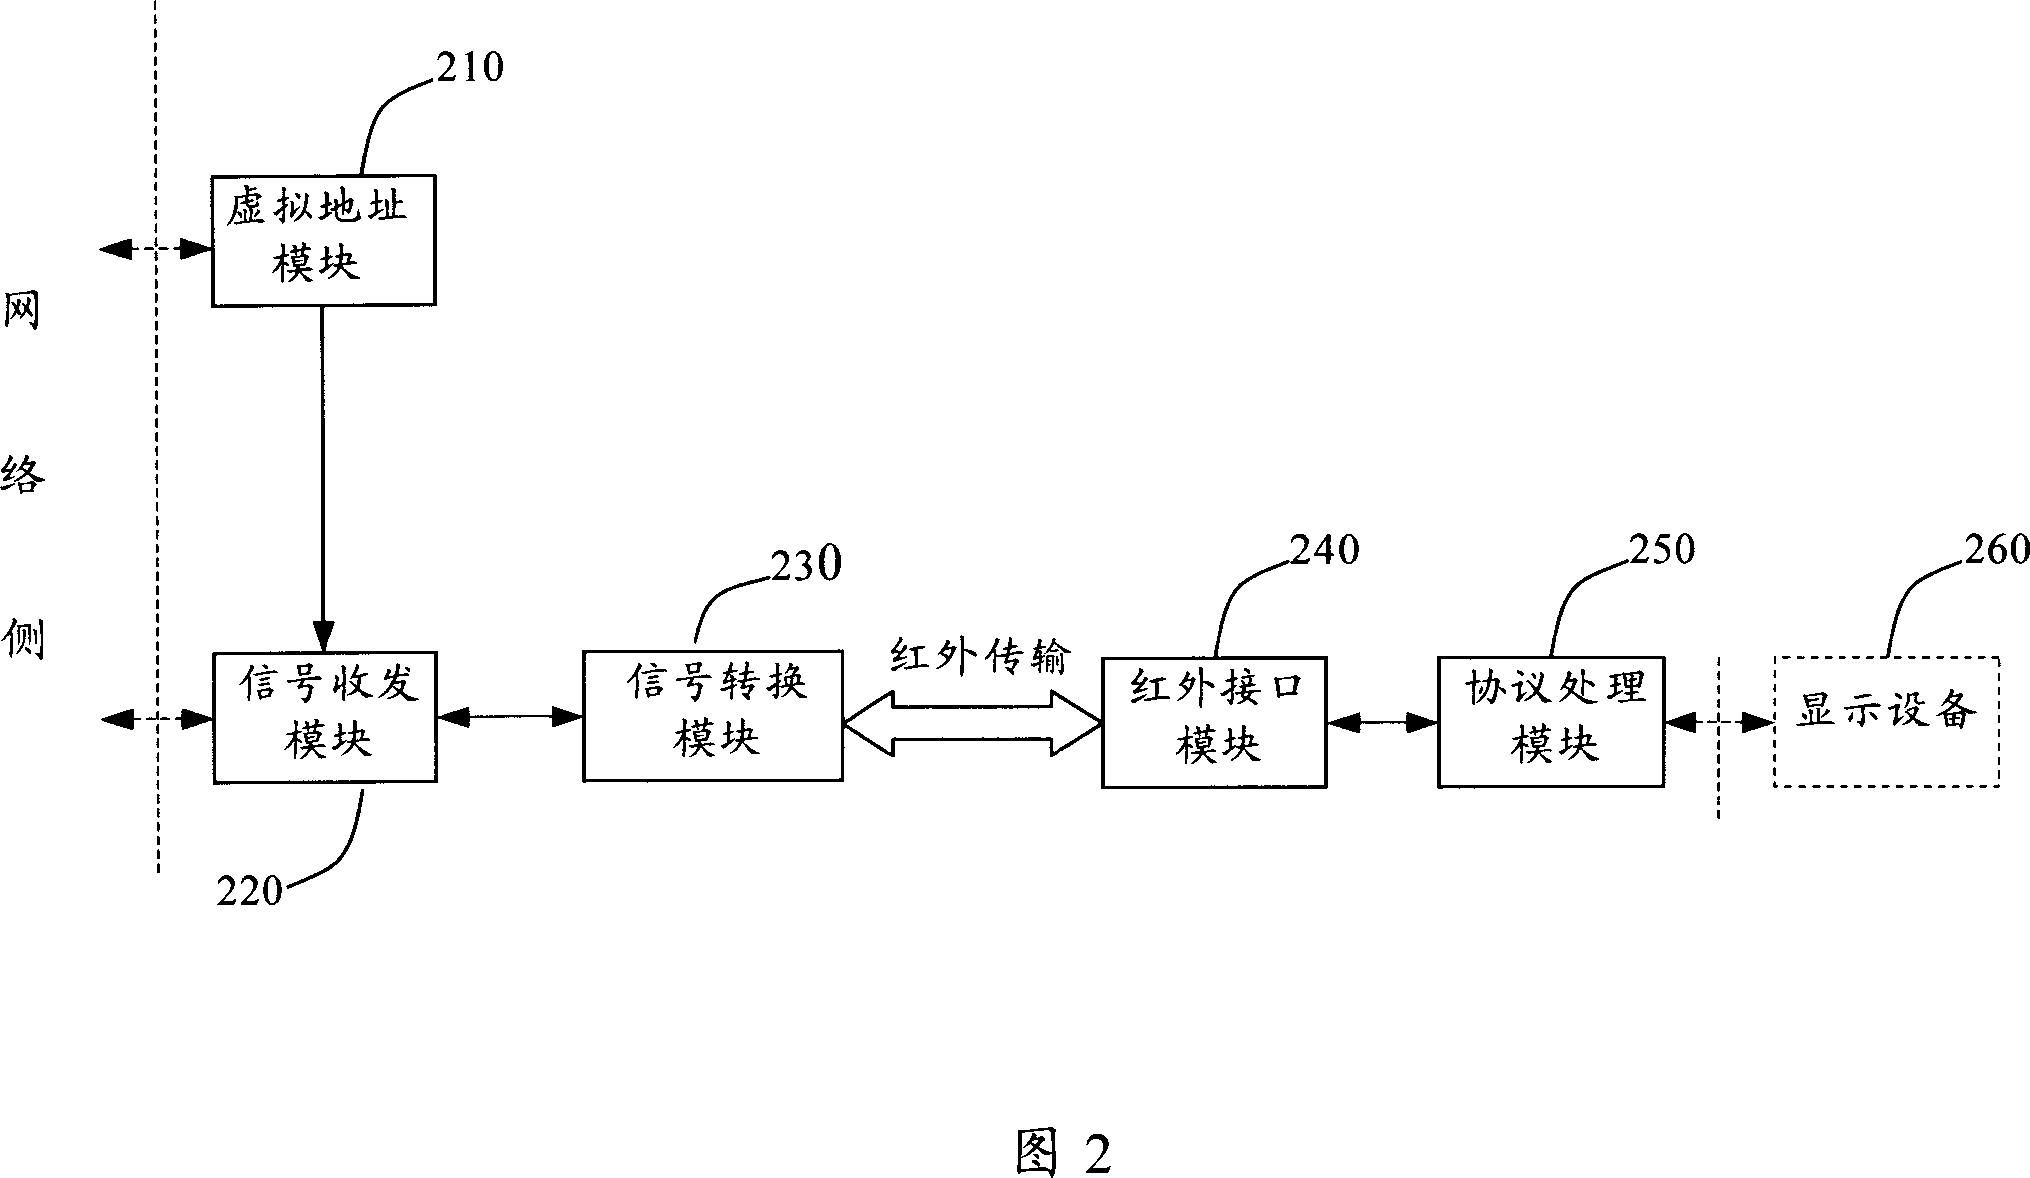 Method and system for radio terminal wire accessing interconnected network